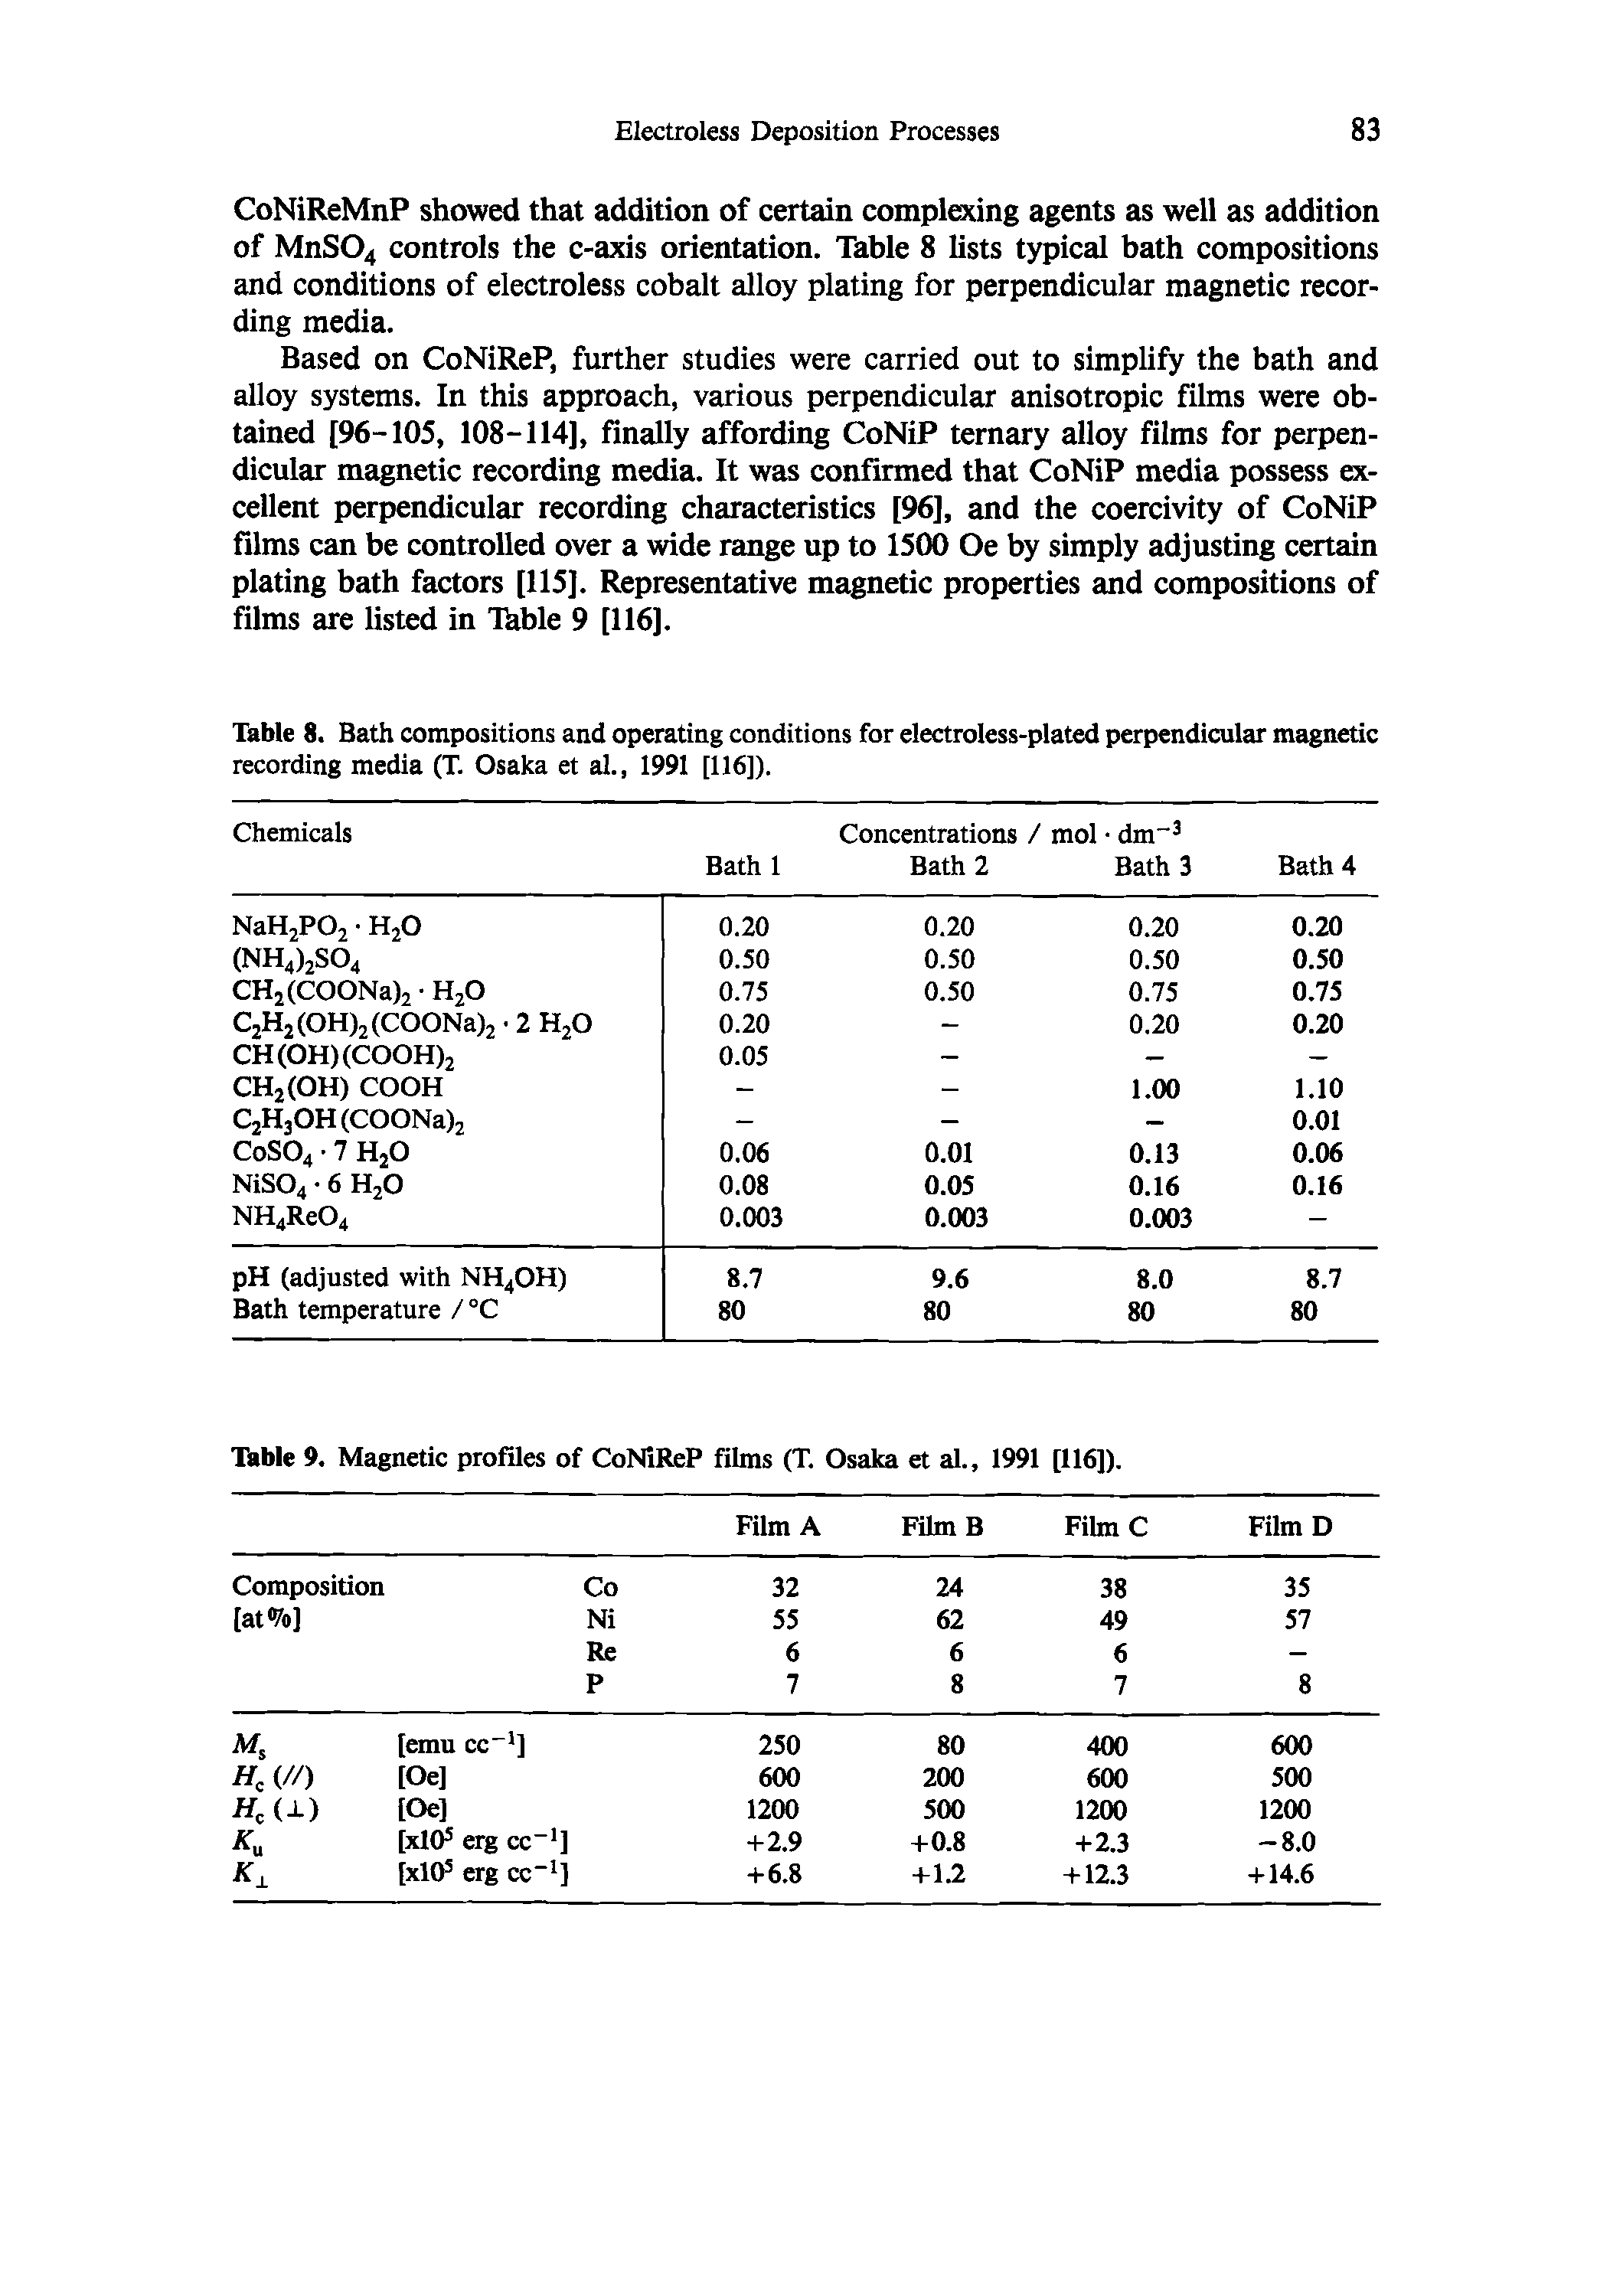 Table 8. Bath compositions and operating conditions for electroless-plated perpendicular magnetic recording media (T. Osaka et al., 1991 [116]).